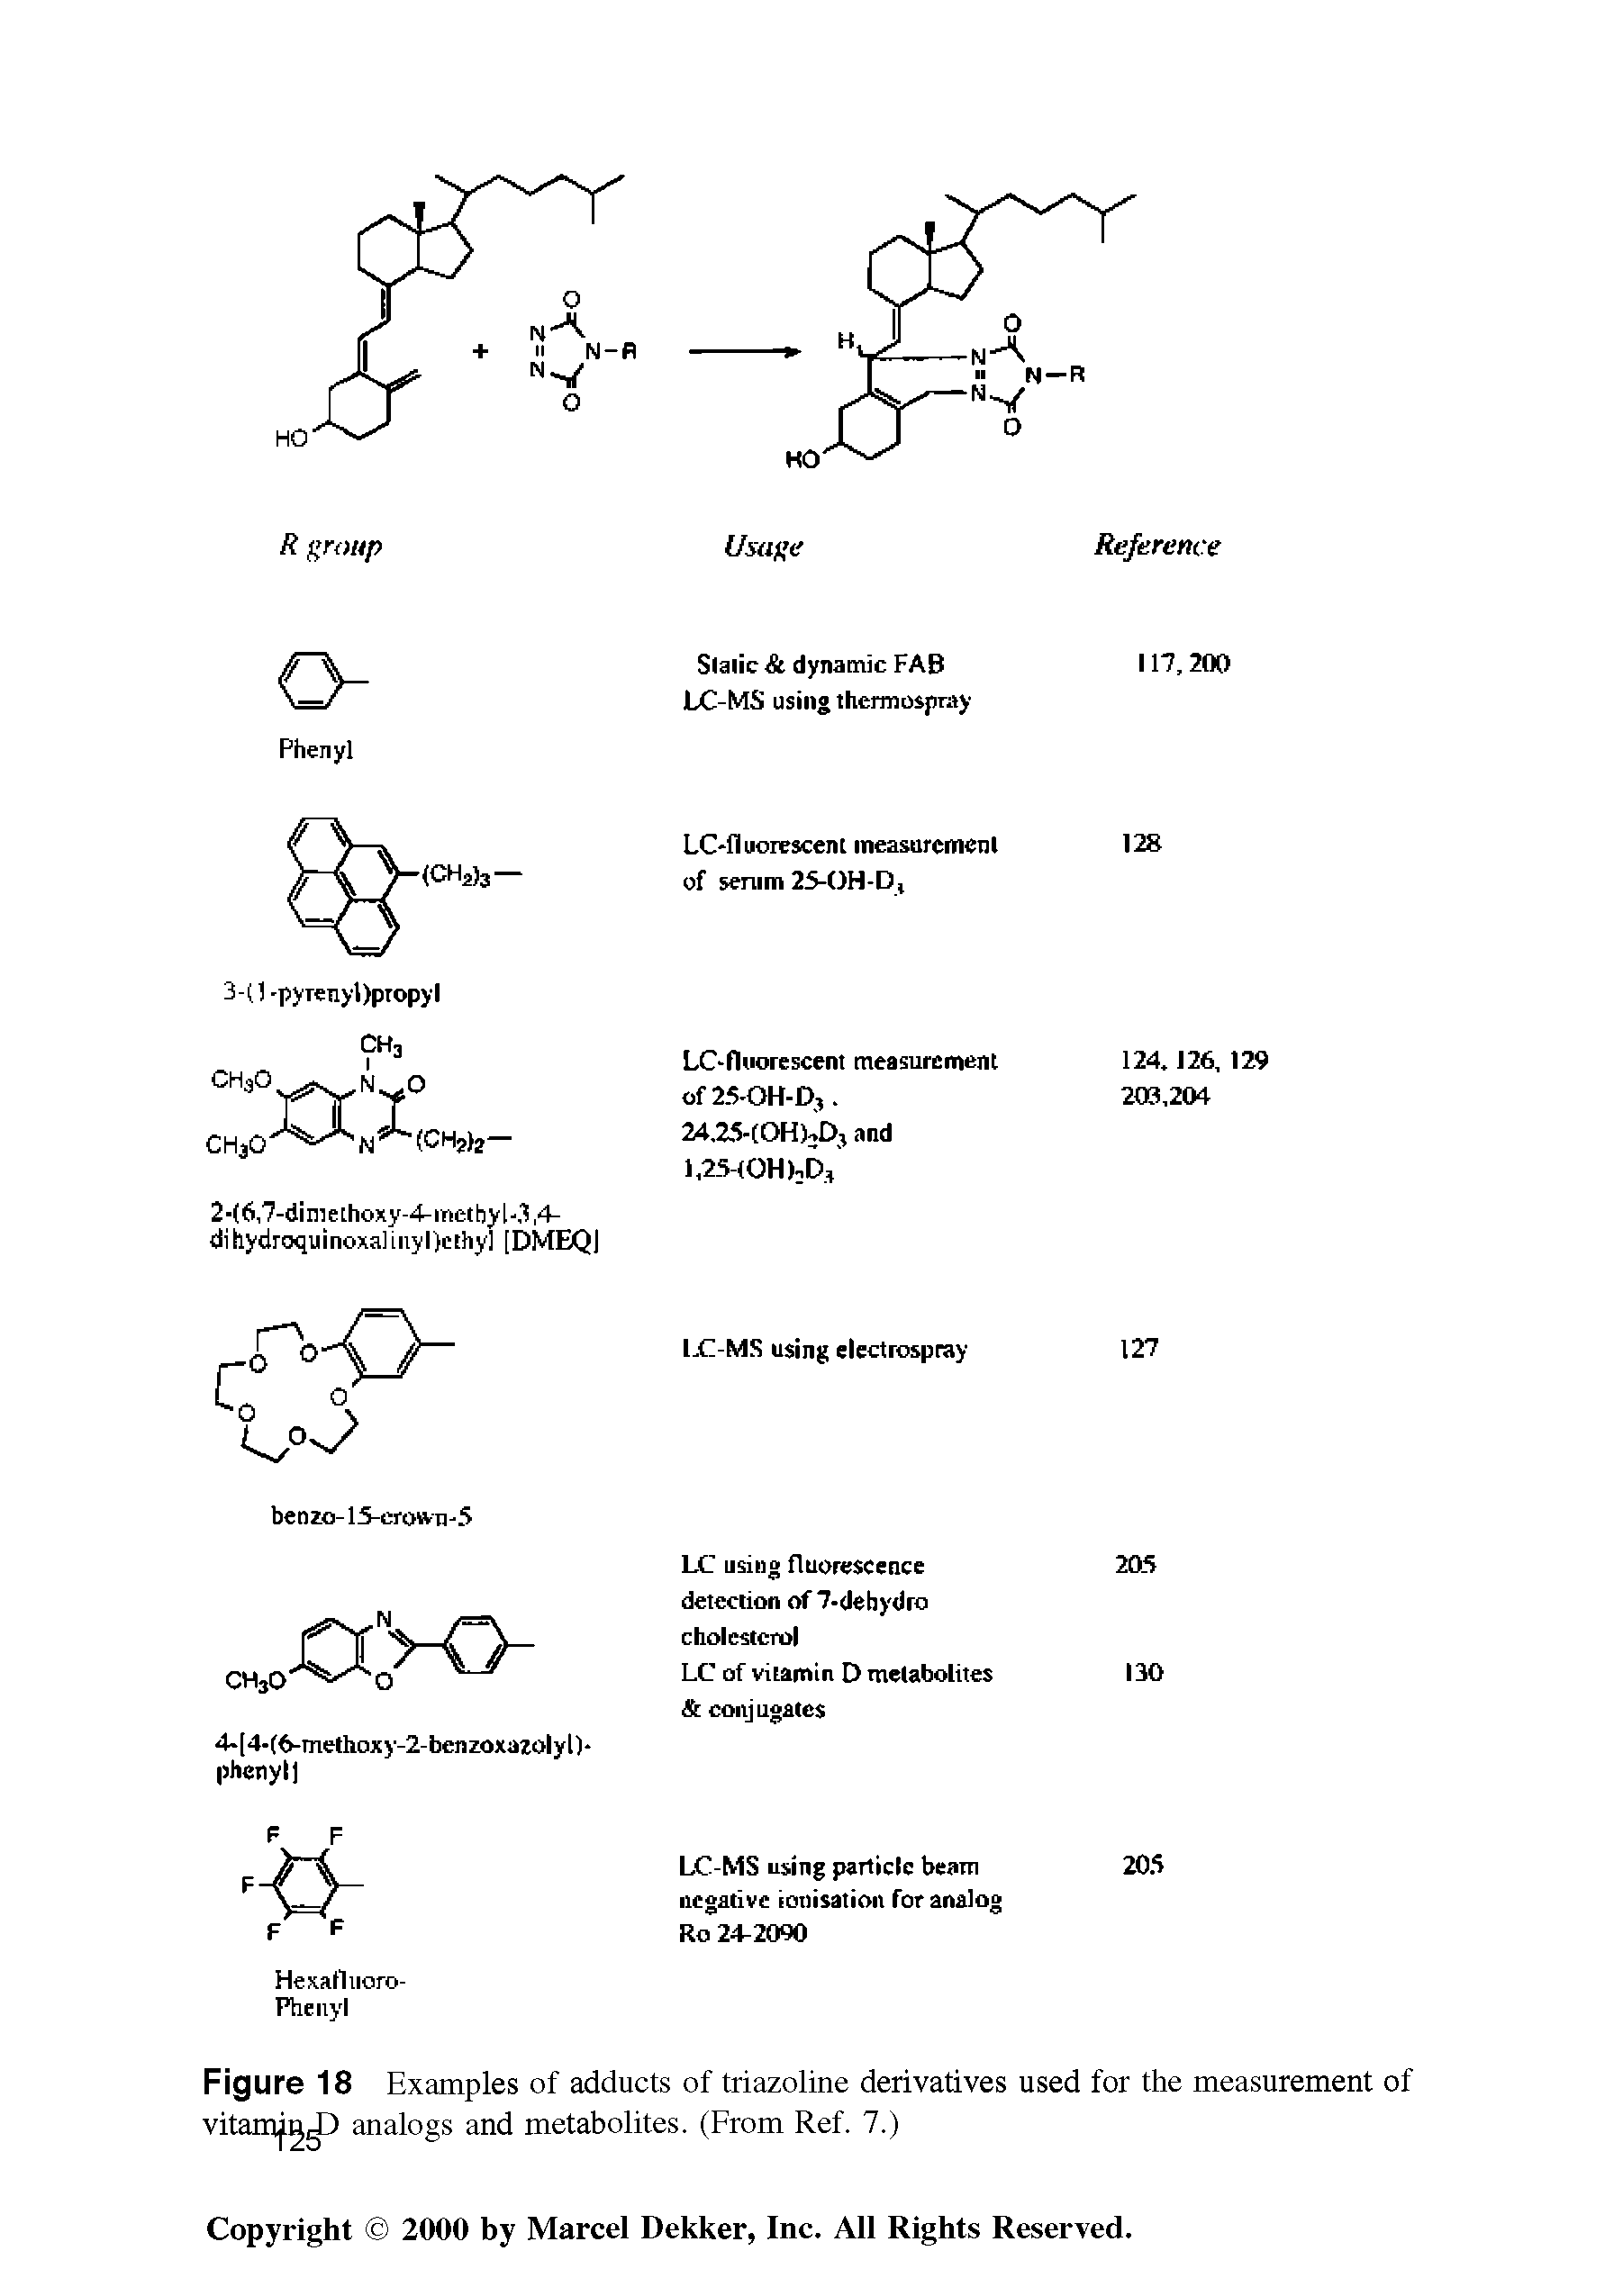 Figure 18 Examples of adducts of triazoline derivatives used for the measurement of vitamig analogs and metabolites. (From Ref. 7.)...